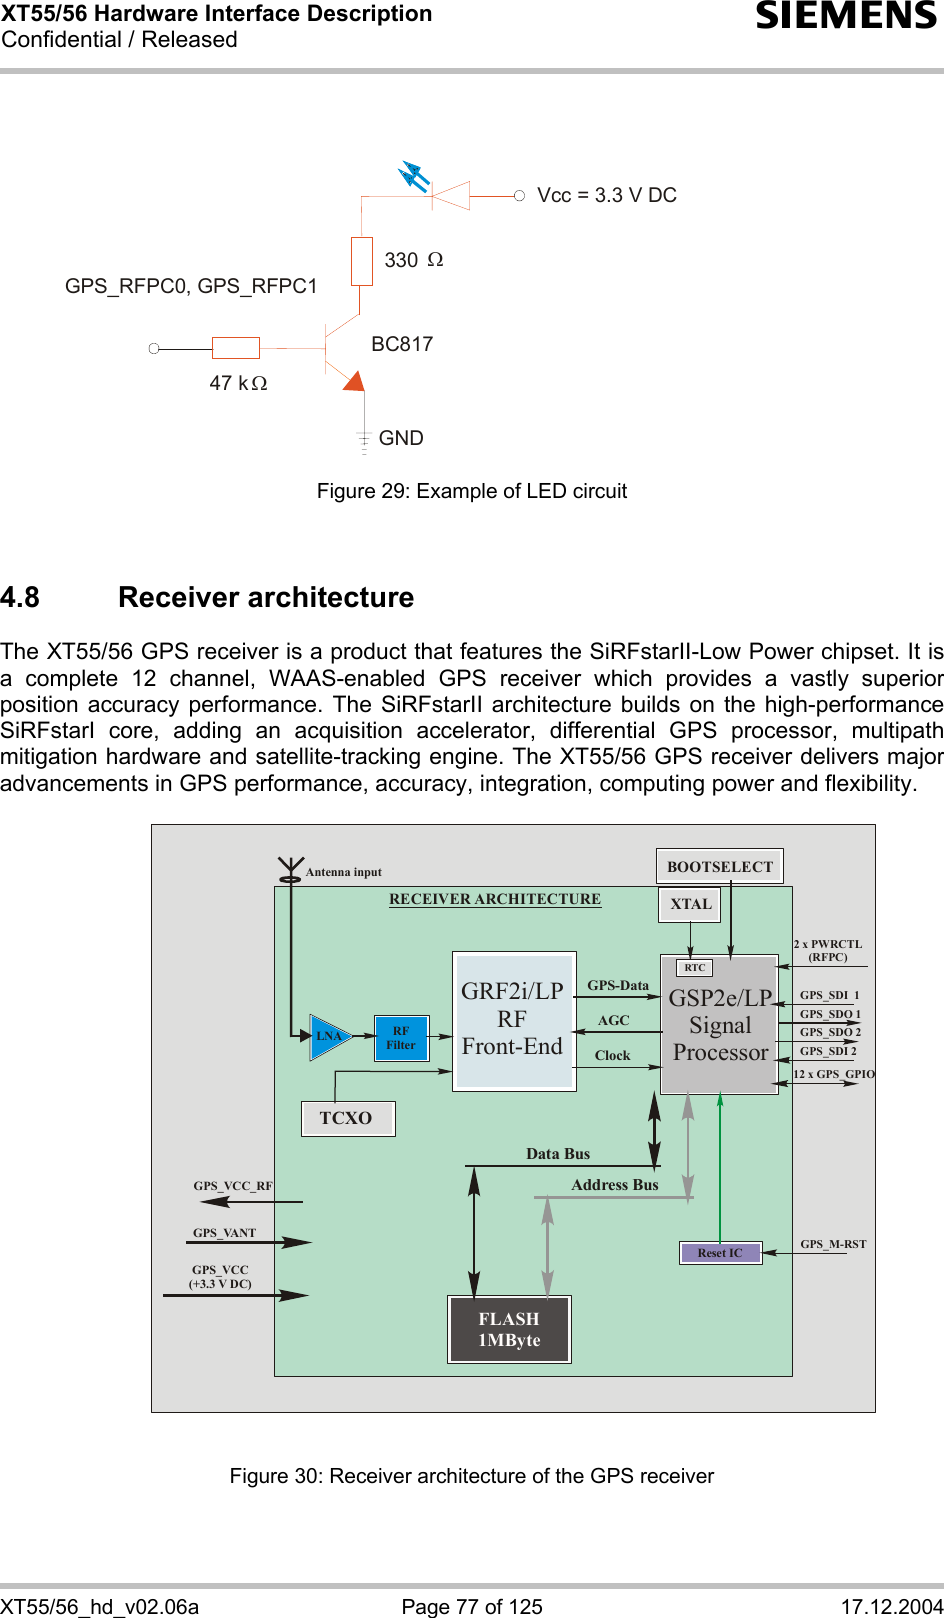 XT55/56 Hardware Interface Description Confidential / Released s XT55/56_hd_v02.06a  Page 77 of 125  17.12.2004               Figure 29: Example of LED circuit   4.8 Receiver architecture The XT55/56 GPS receiver is a product that features the SiRFstarII-Low Power chipset. It is a complete 12 channel, WAAS-enabled GPS receiver which provides a vastly superior position accuracy performance. The SiRFstarII architecture builds on the high-performance SiRFstarI core, adding an acquisition accelerator, differential GPS processor, multipath mitigation hardware and satellite-tracking engine. The XT55/56 GPS receiver delivers major advancements in GPS performance, accuracy, integration, computing power and flexibility.   Antenna input LNA RF FilterGRF2i/LPRFFront-EndGSP2e/LPSignalProcessorXTALData BusAddress BusGPS-DataAGCClockReset ICFLASH1MByteTCXOGPS_VCC (+3.3 V DC)2 x PWRCTL(RFPC)GPS_SDI  1GPS_SDO 1GPS_SDO 2GPS_SDI 212 x GPS_GPIOGPS_M-RSTBOOTSELECTGPS_VANTGPS_VCC_RFRECEIVER ARCHITECTURERTC Figure 30: Receiver architecture of the GPS receiver     GPS_RFPC0, GPS_RFPC1 330 ΩVcc = 3.3 V DCBC81747 k Ω GND